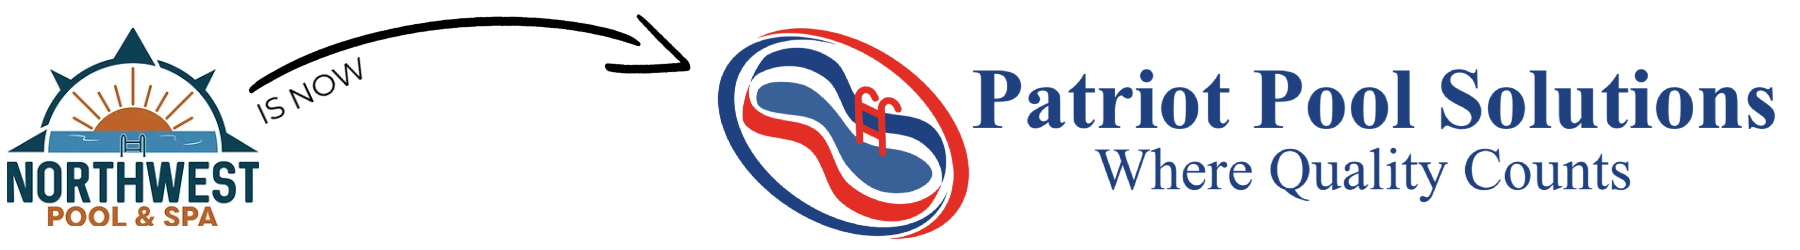 Northwest Pool and Spa is now Patriot Pool Solutions Destin FL